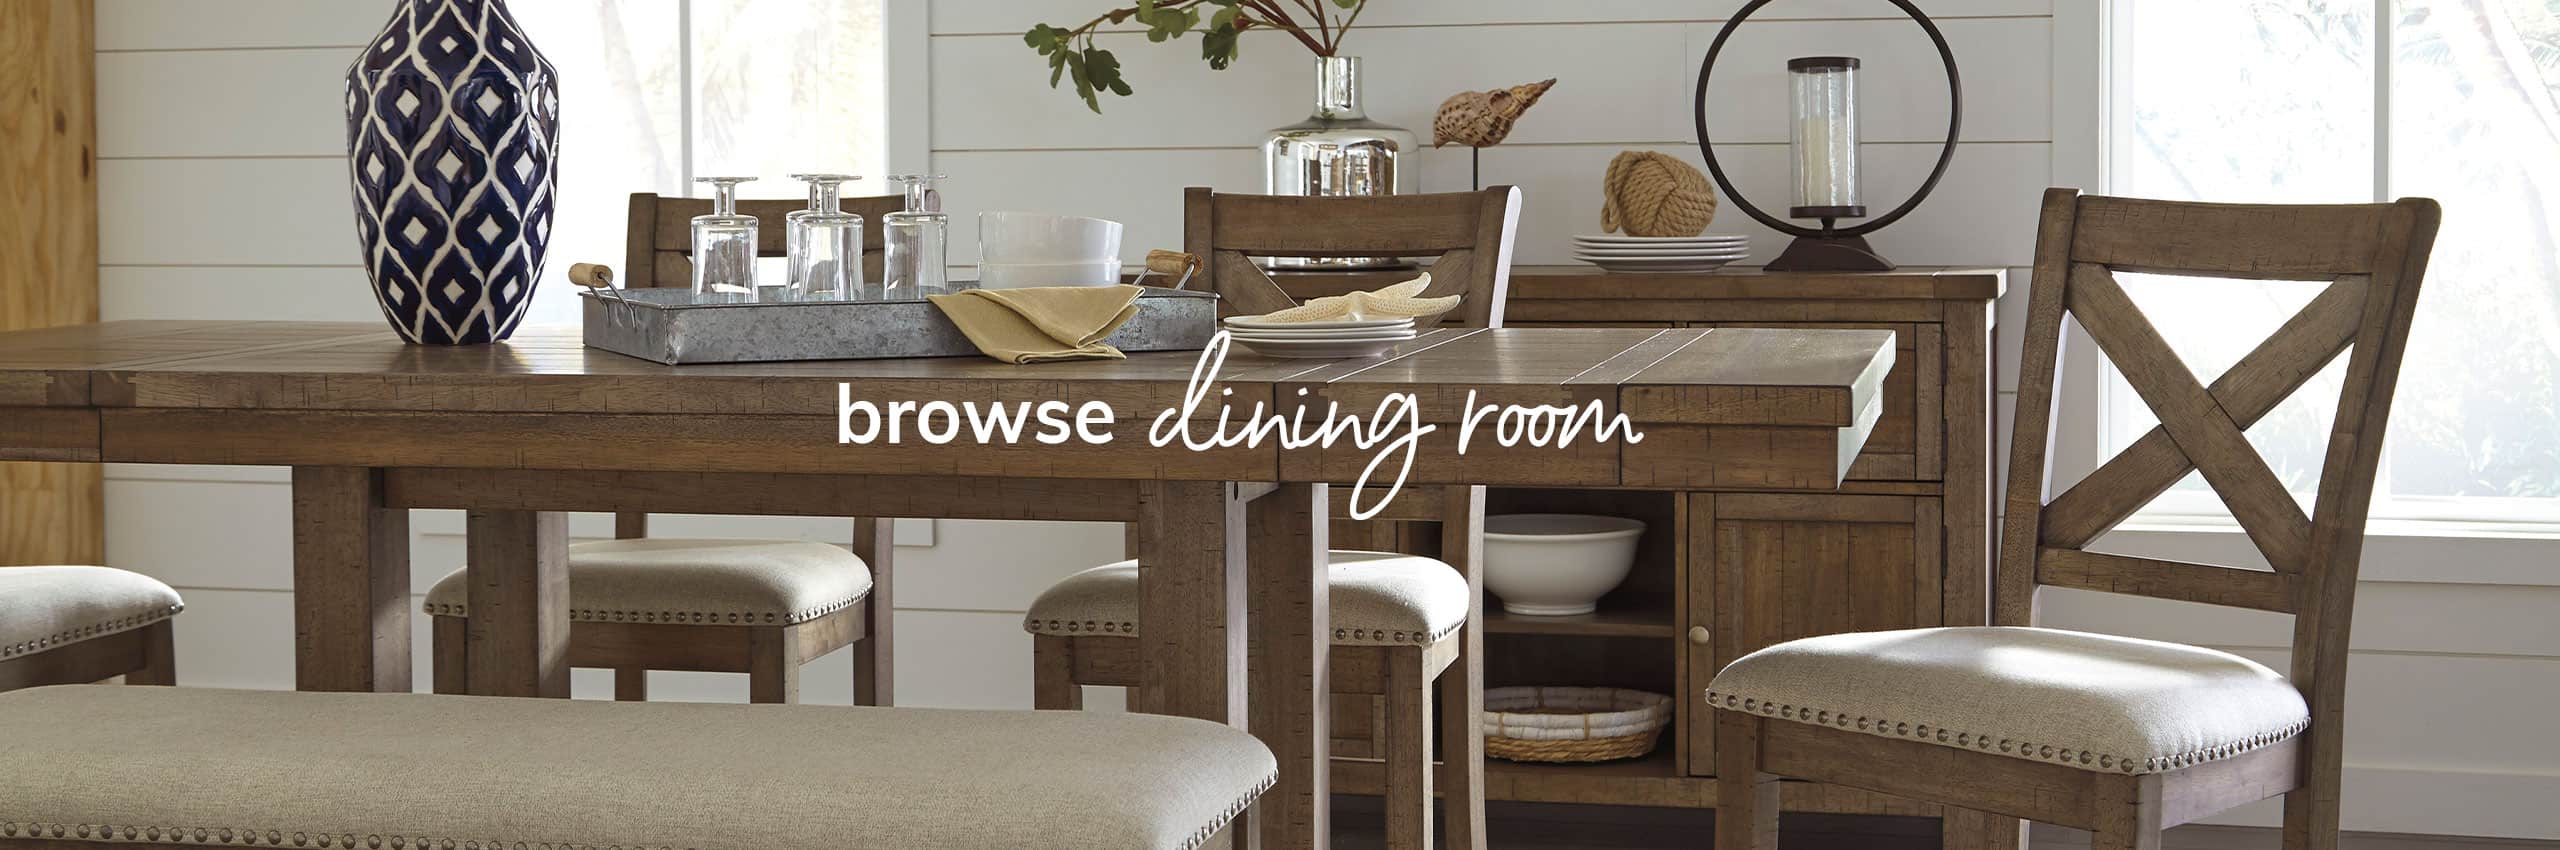 browse dining room